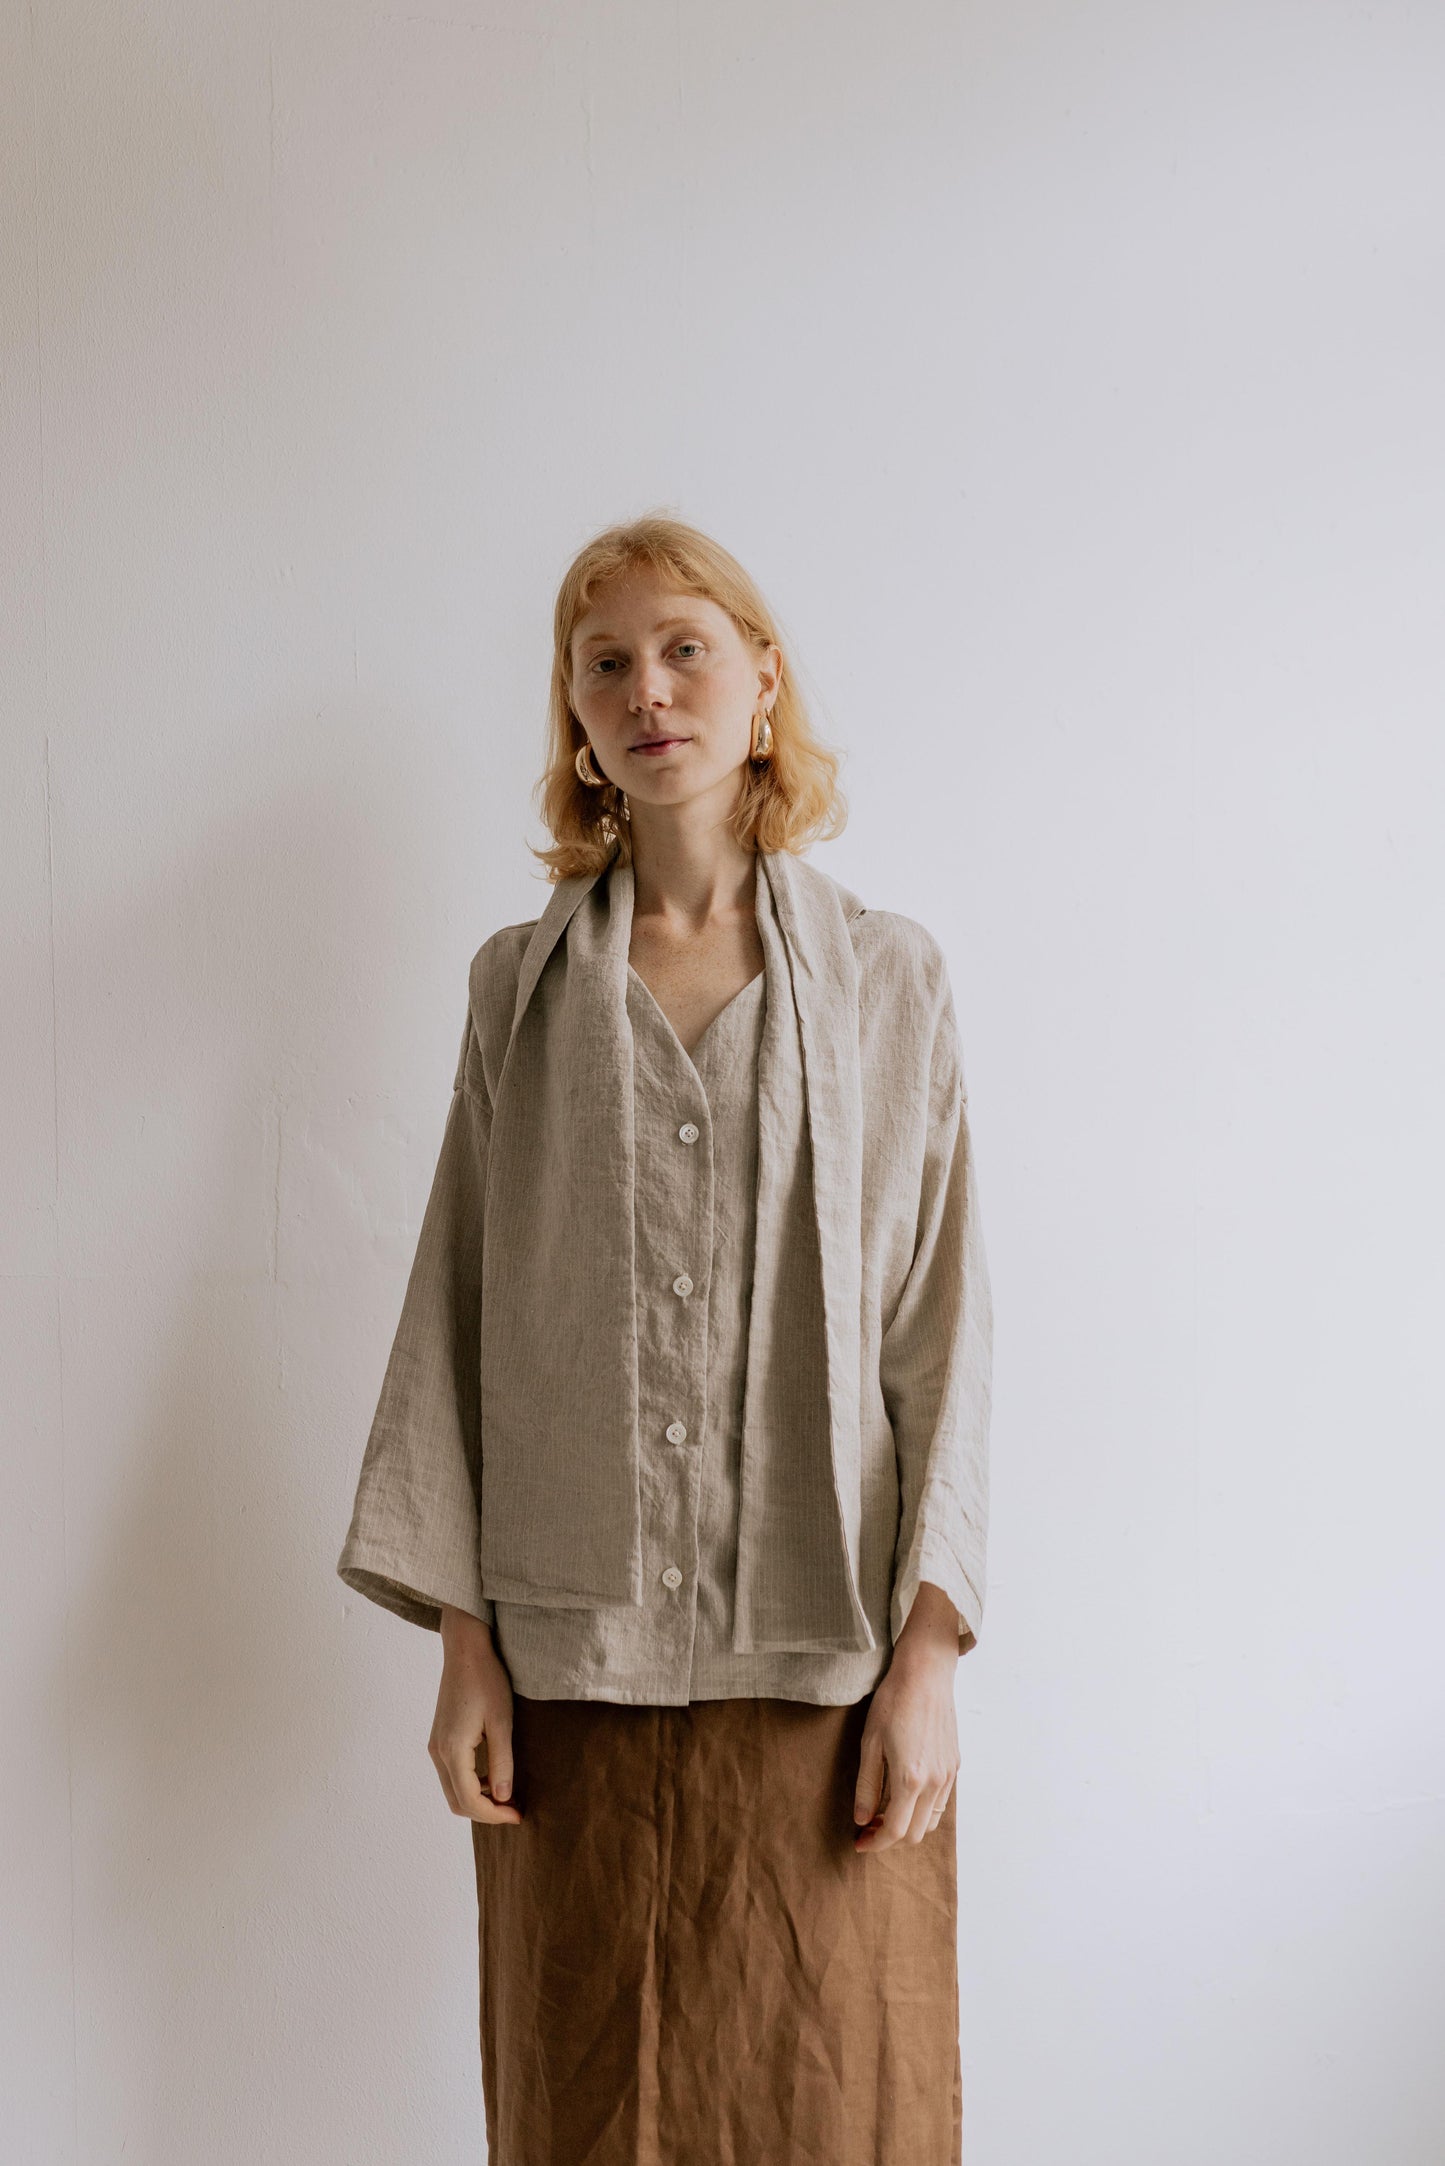 FREYA | STRIPE | Our much loved Freya Blouse in an updated brown/white stripe colour way. The shirt has an oversized collar that is secured with a tie at the back. You can play around with how the collar folds to suit your own look. In keeping with the ve